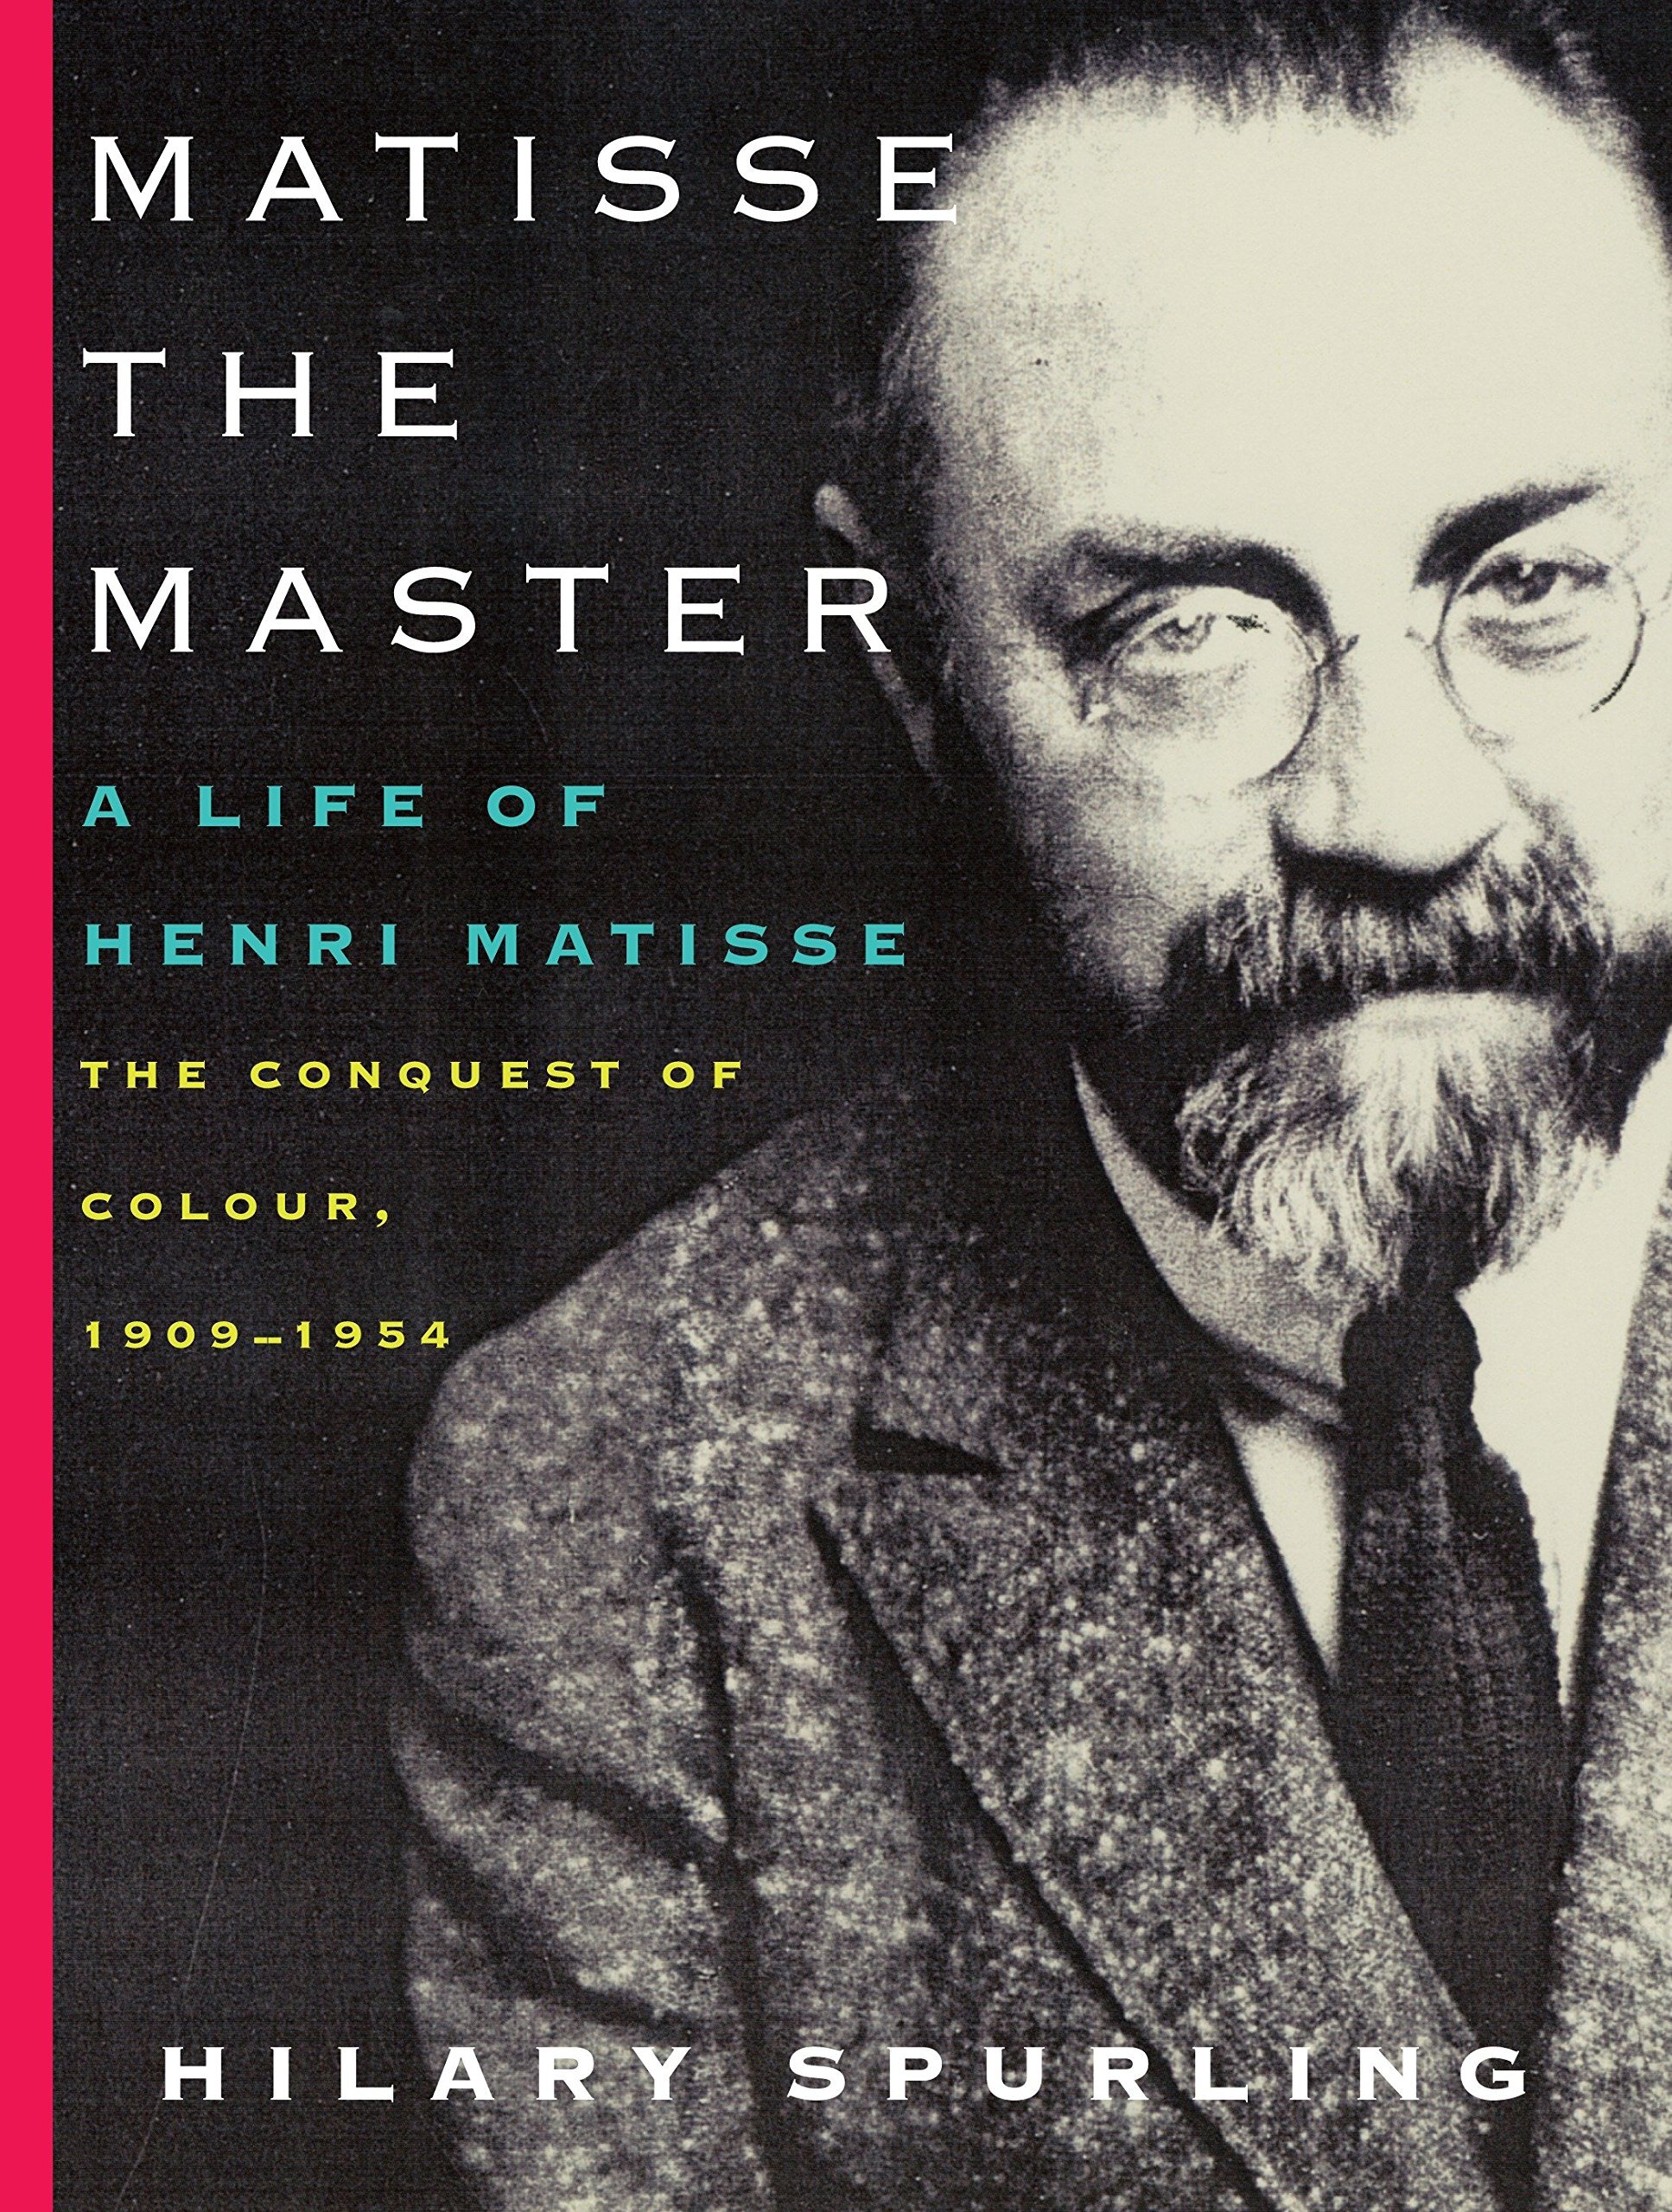 Matisse the Master, Hilary Spurling, 2005 (Copy)